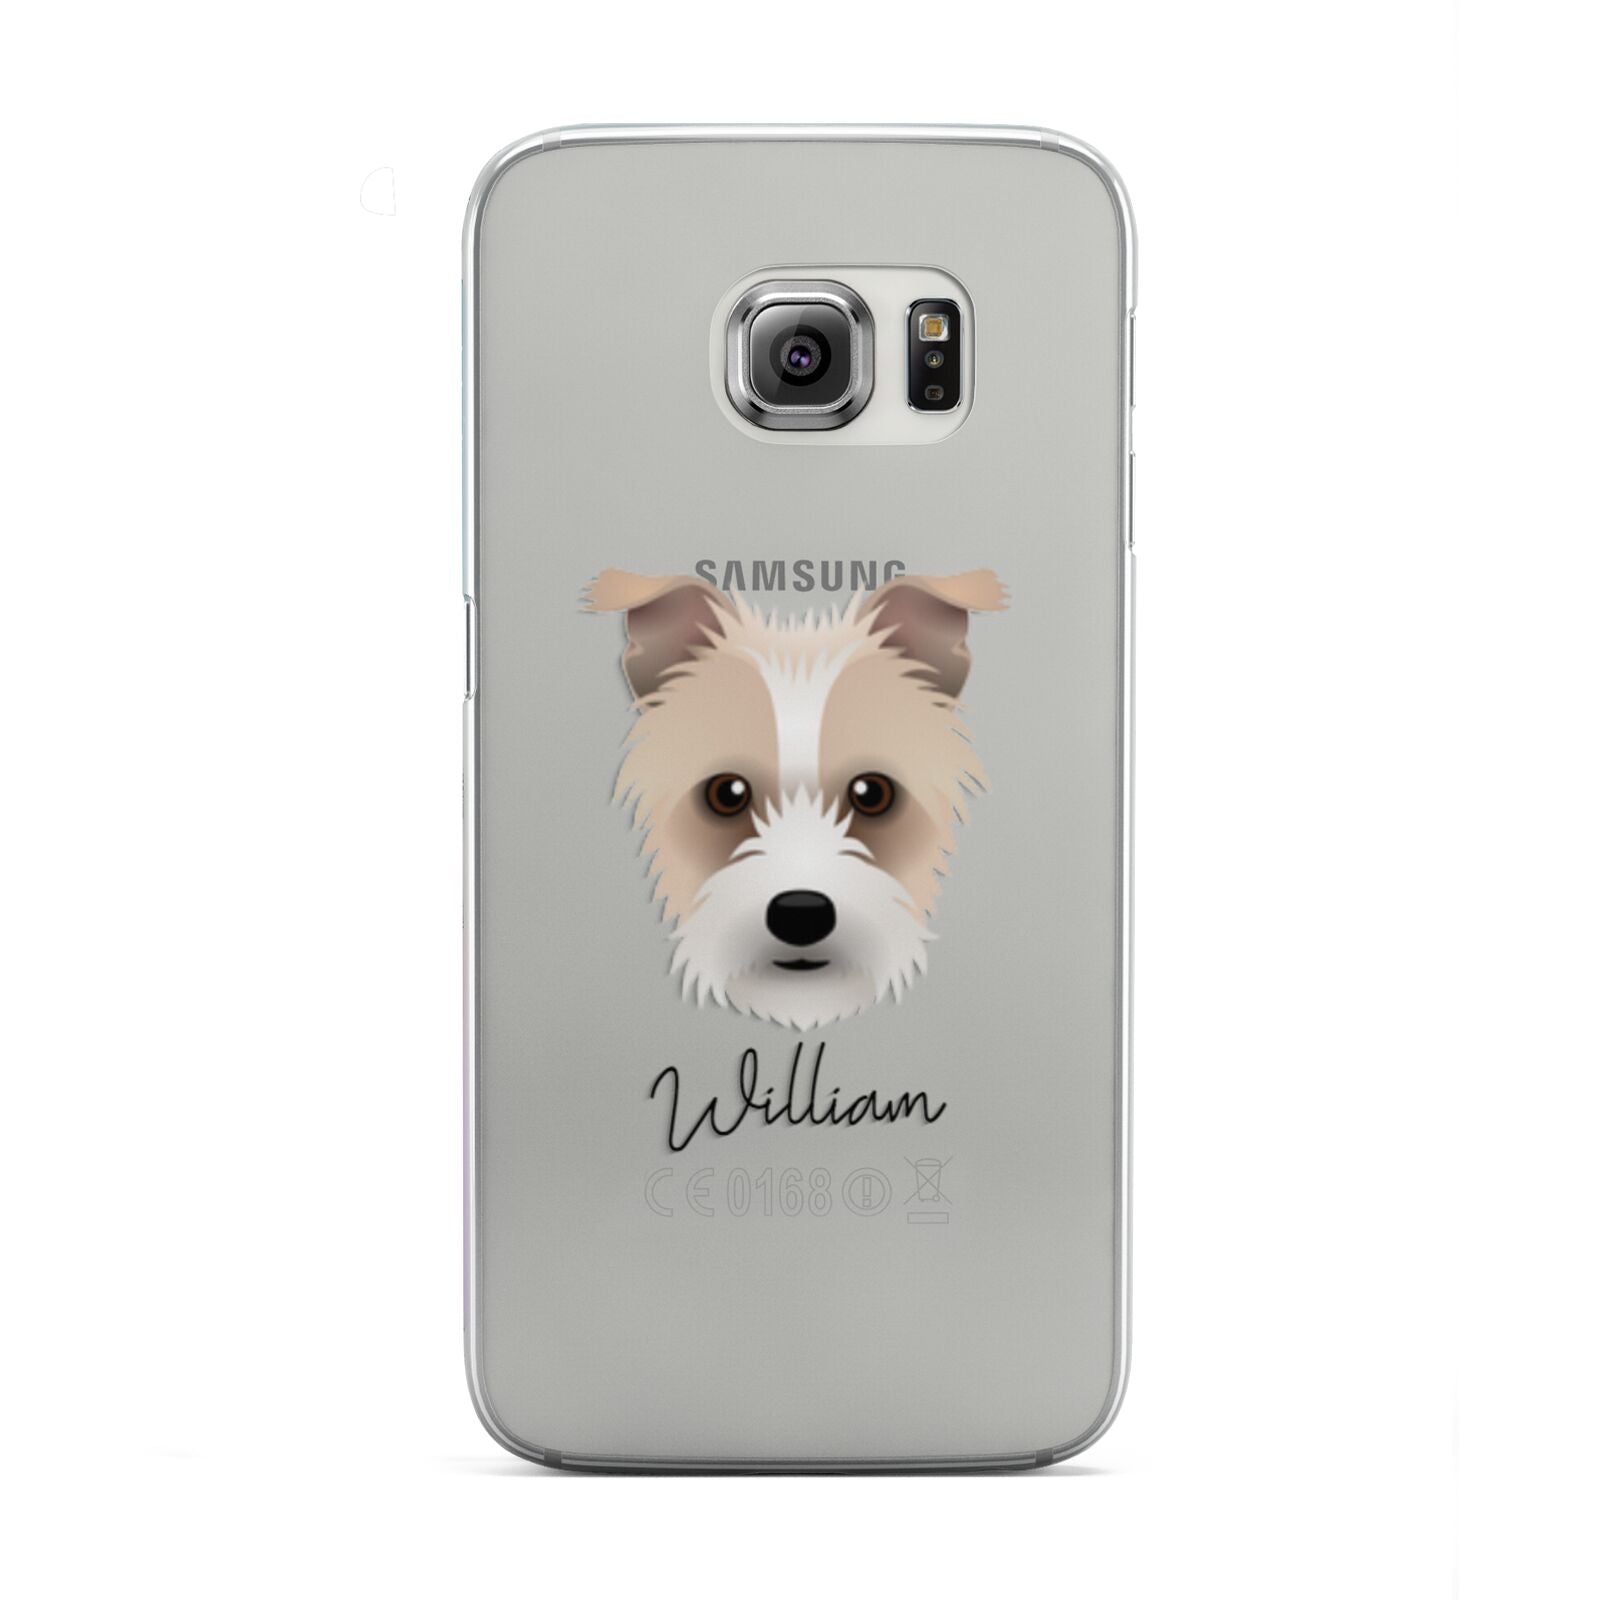 Sporting Lucas Terrier Personalised Samsung Galaxy S6 Edge Case